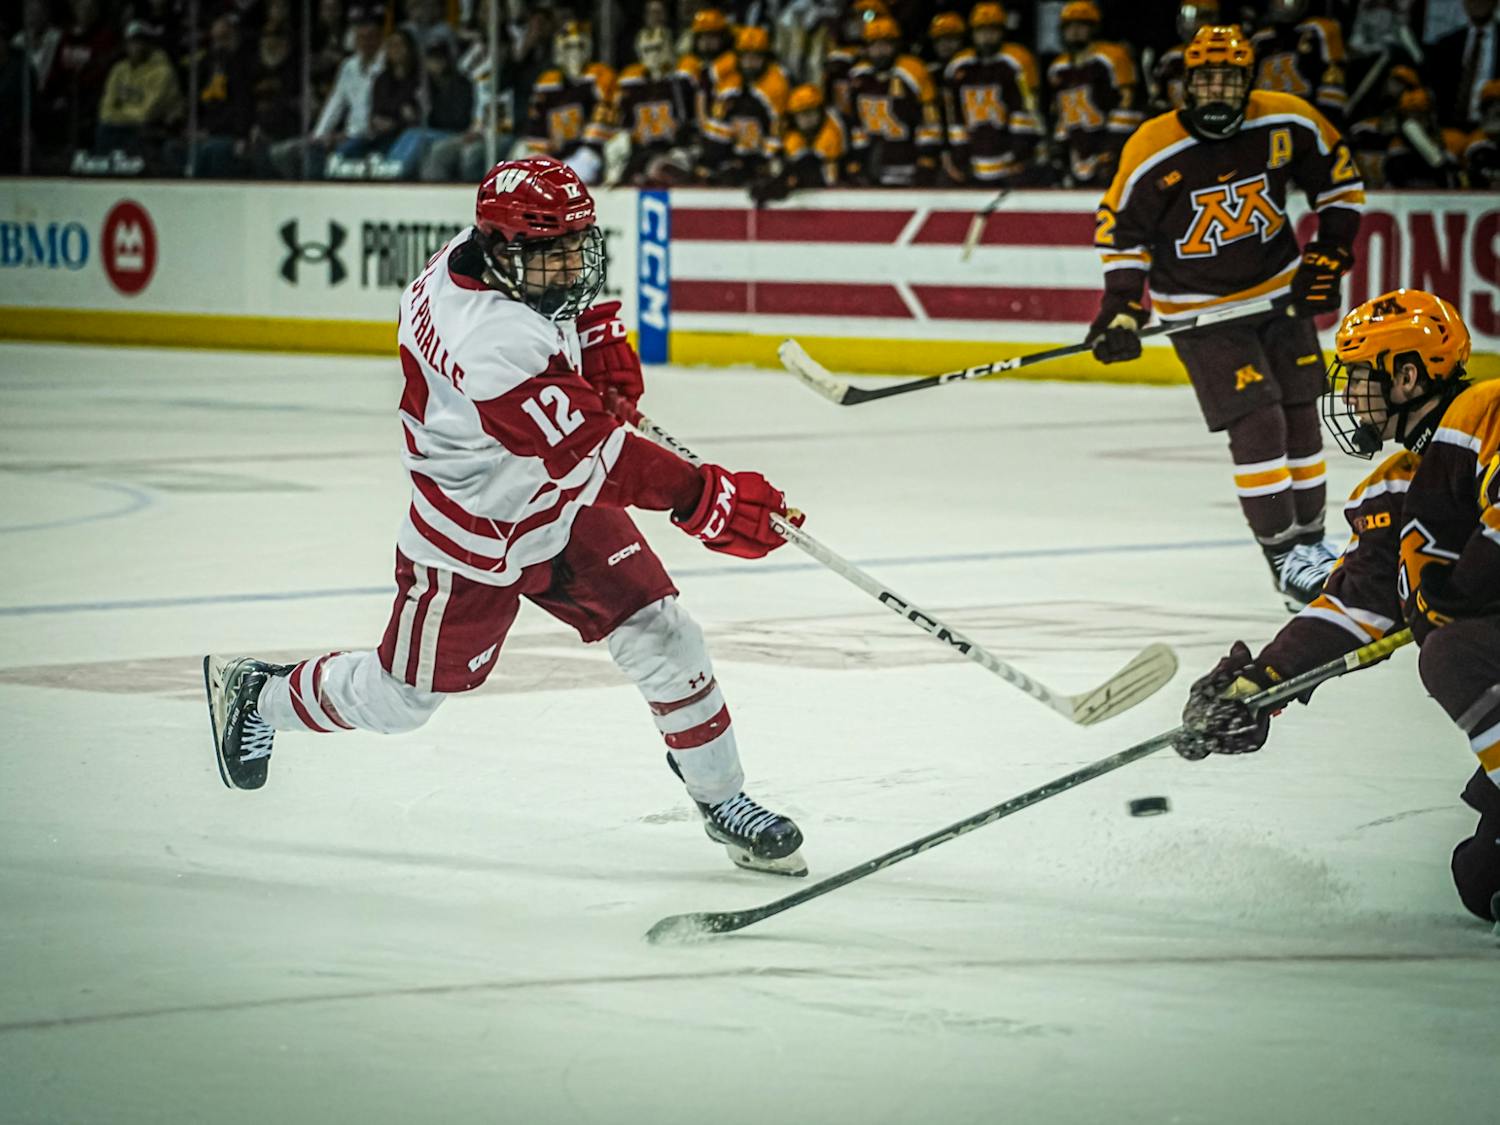 PHOTOS: Badgers beat Gophers in a shootout game